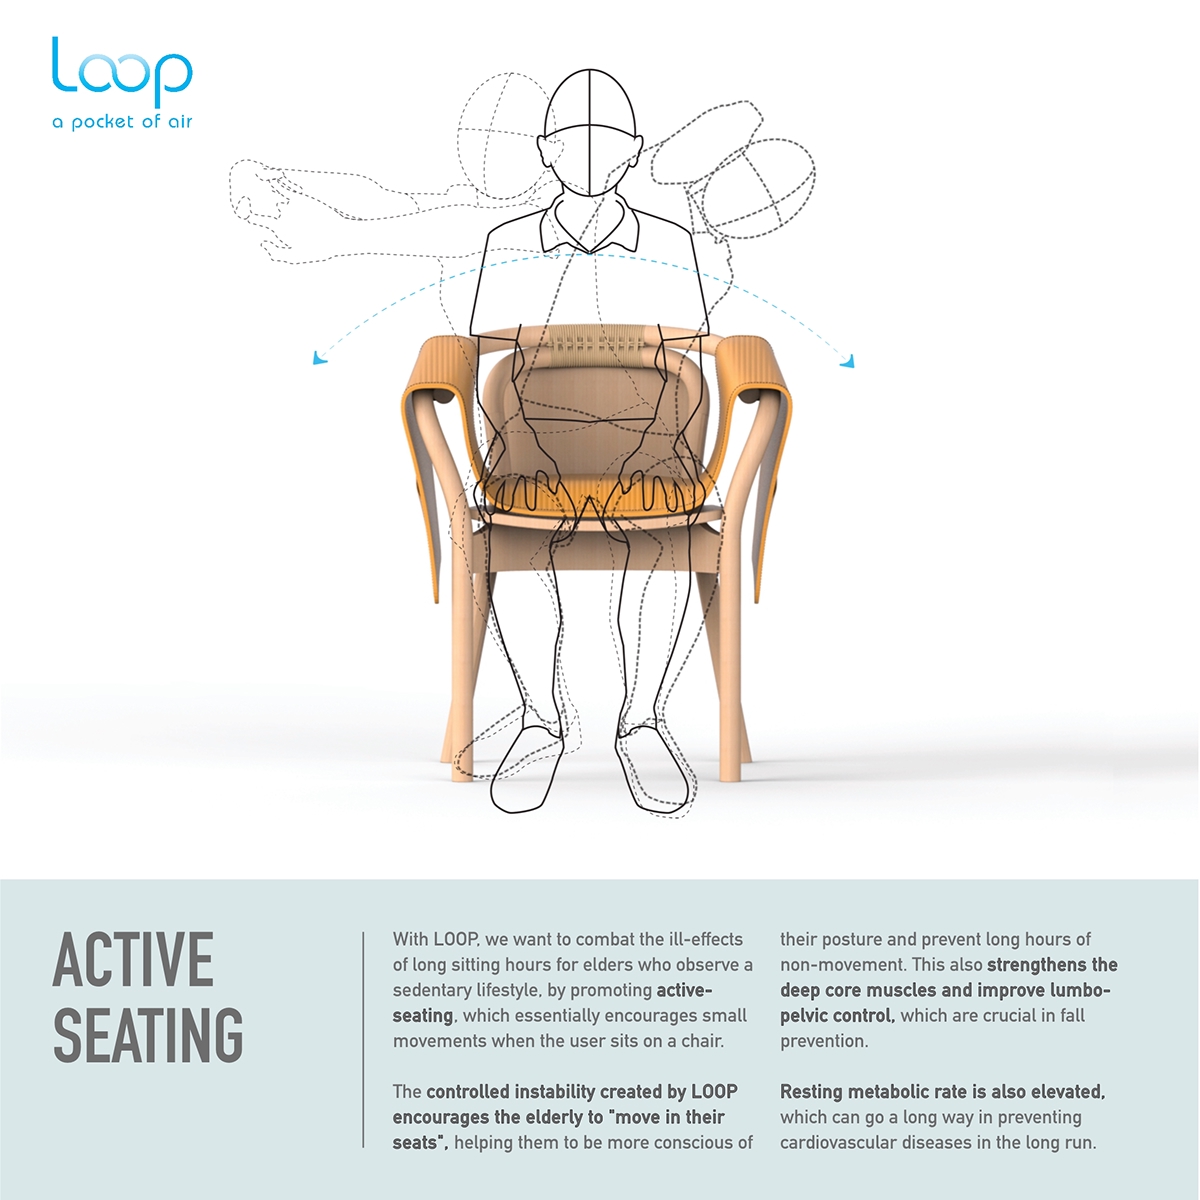 active seating furniture seating Elderly lifestyle medical aged thesis Silver Lining